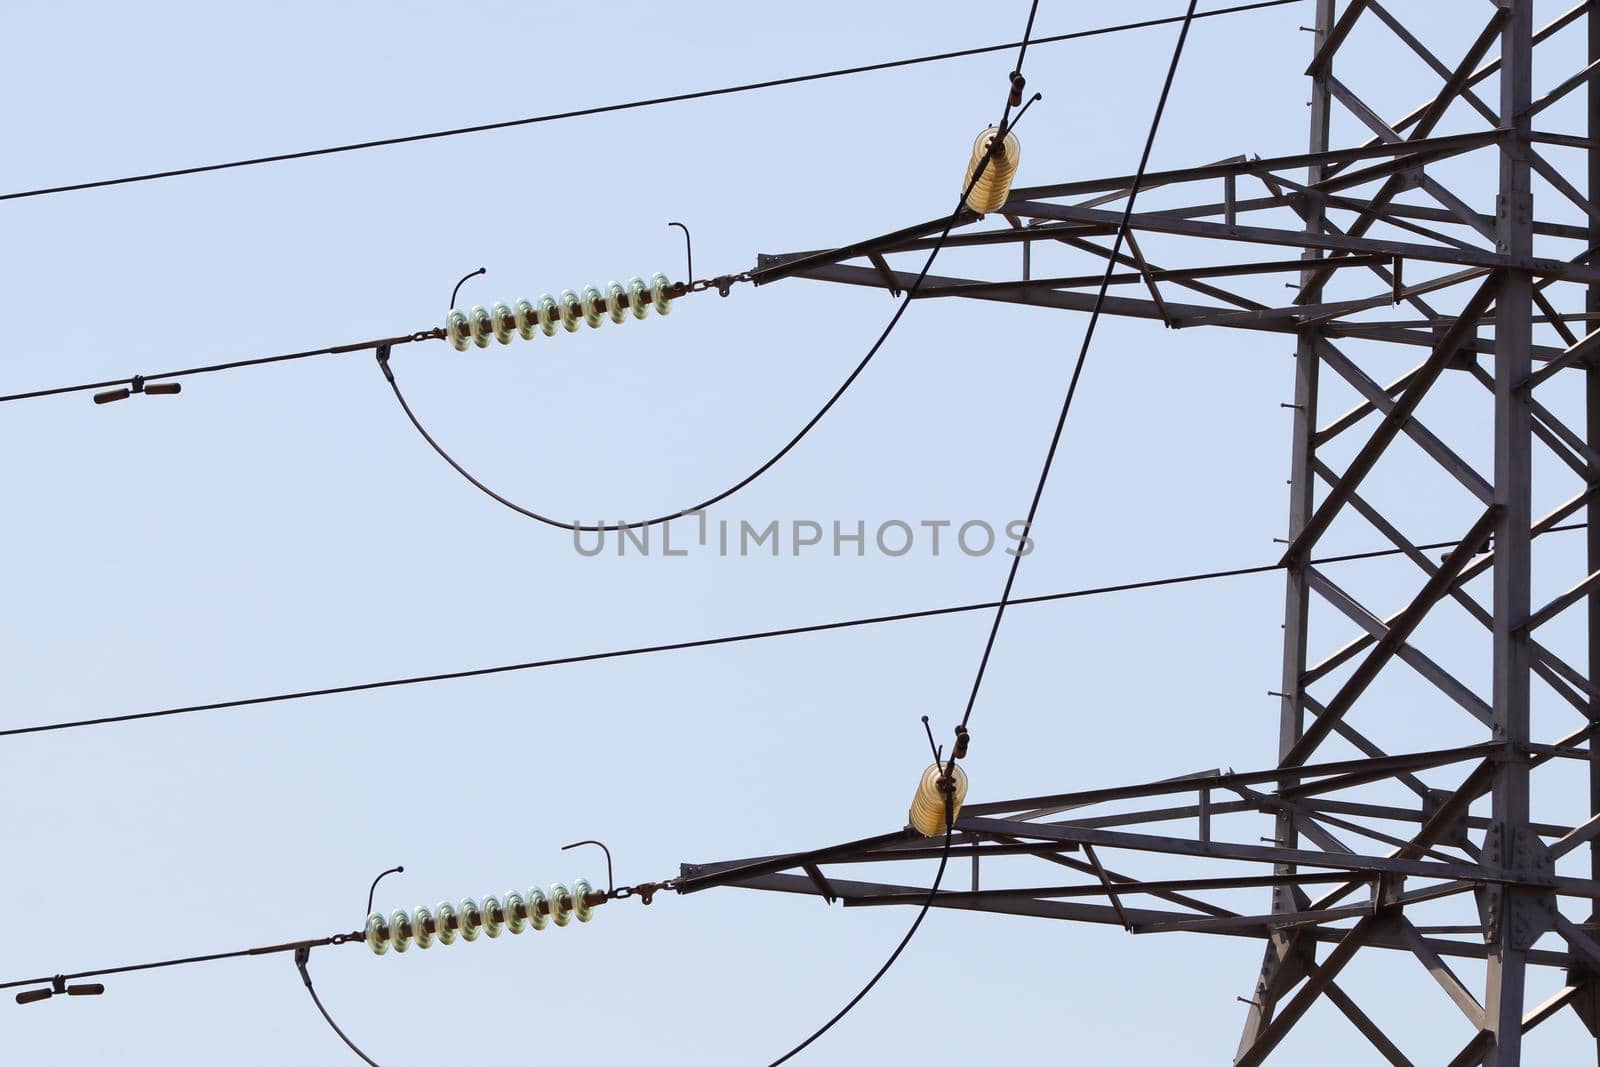 Insulated Electrical Cables On Power Pylon Close-up by jjvanginkel